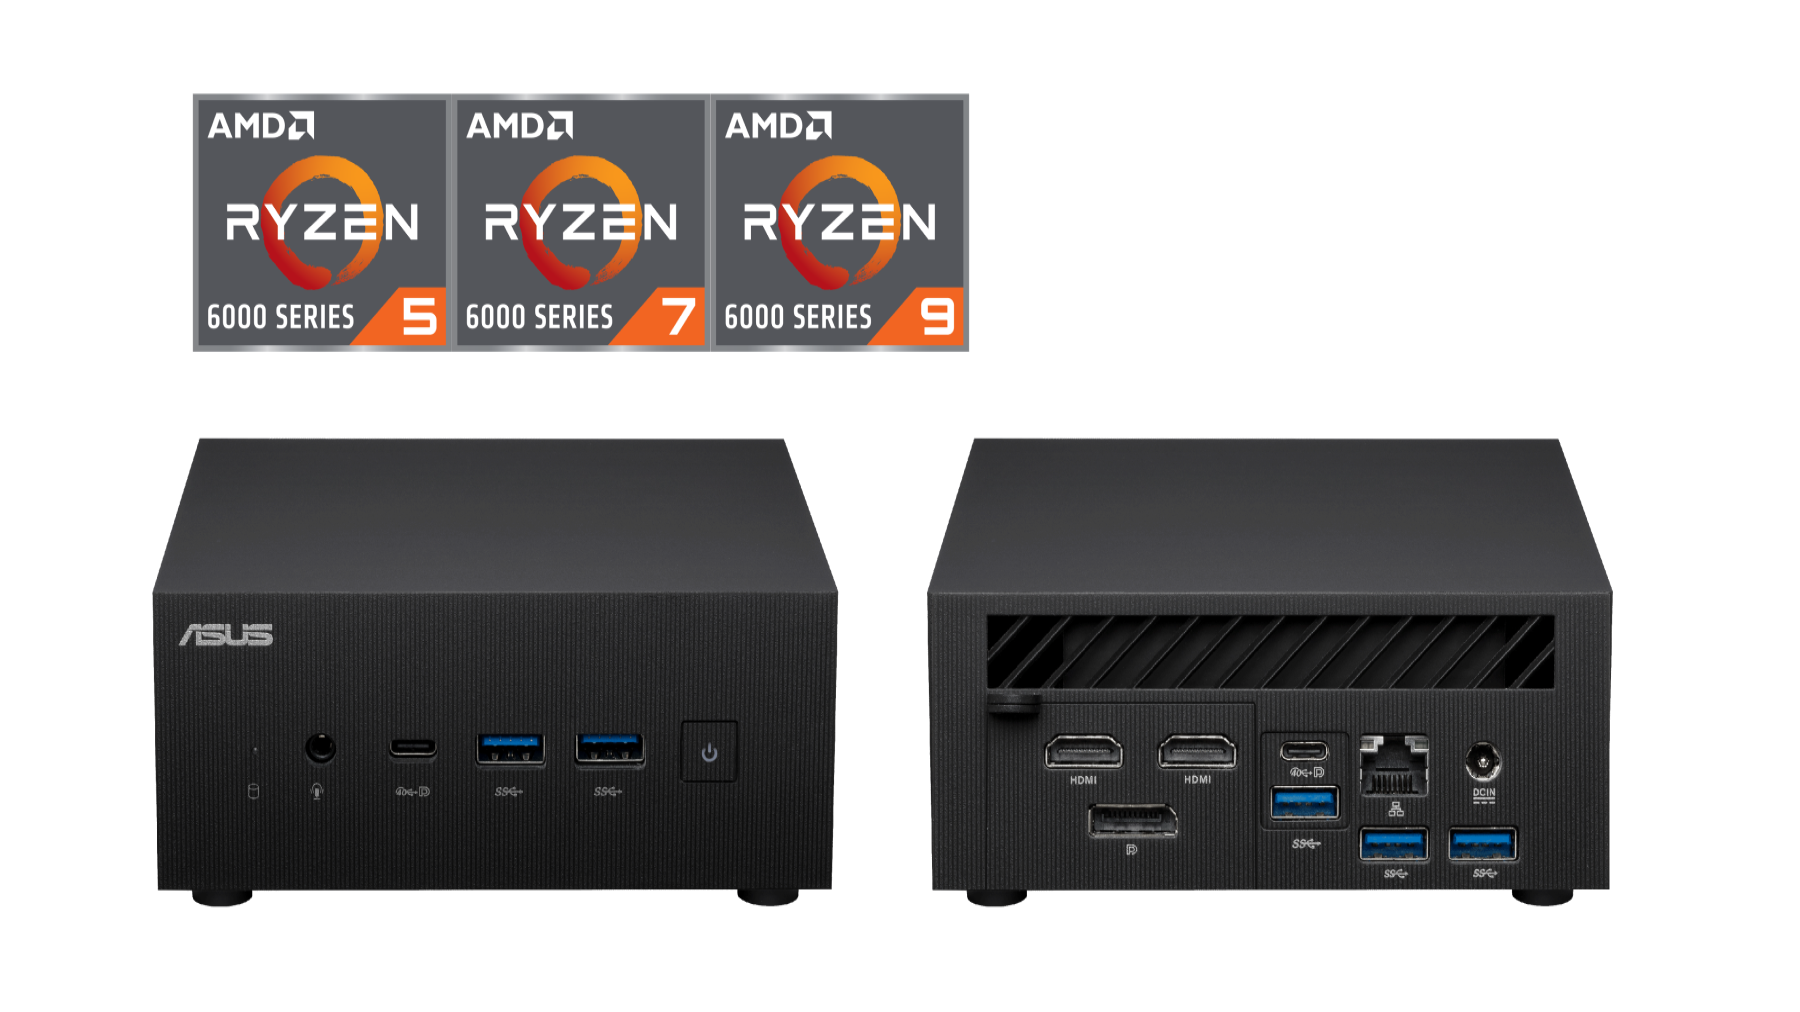 ExpertCenter PN53, a mini PC that harnesses the power of the latest AMD Ryzen™ 6000 series processor with AMD Radeon™ 600M series graphics